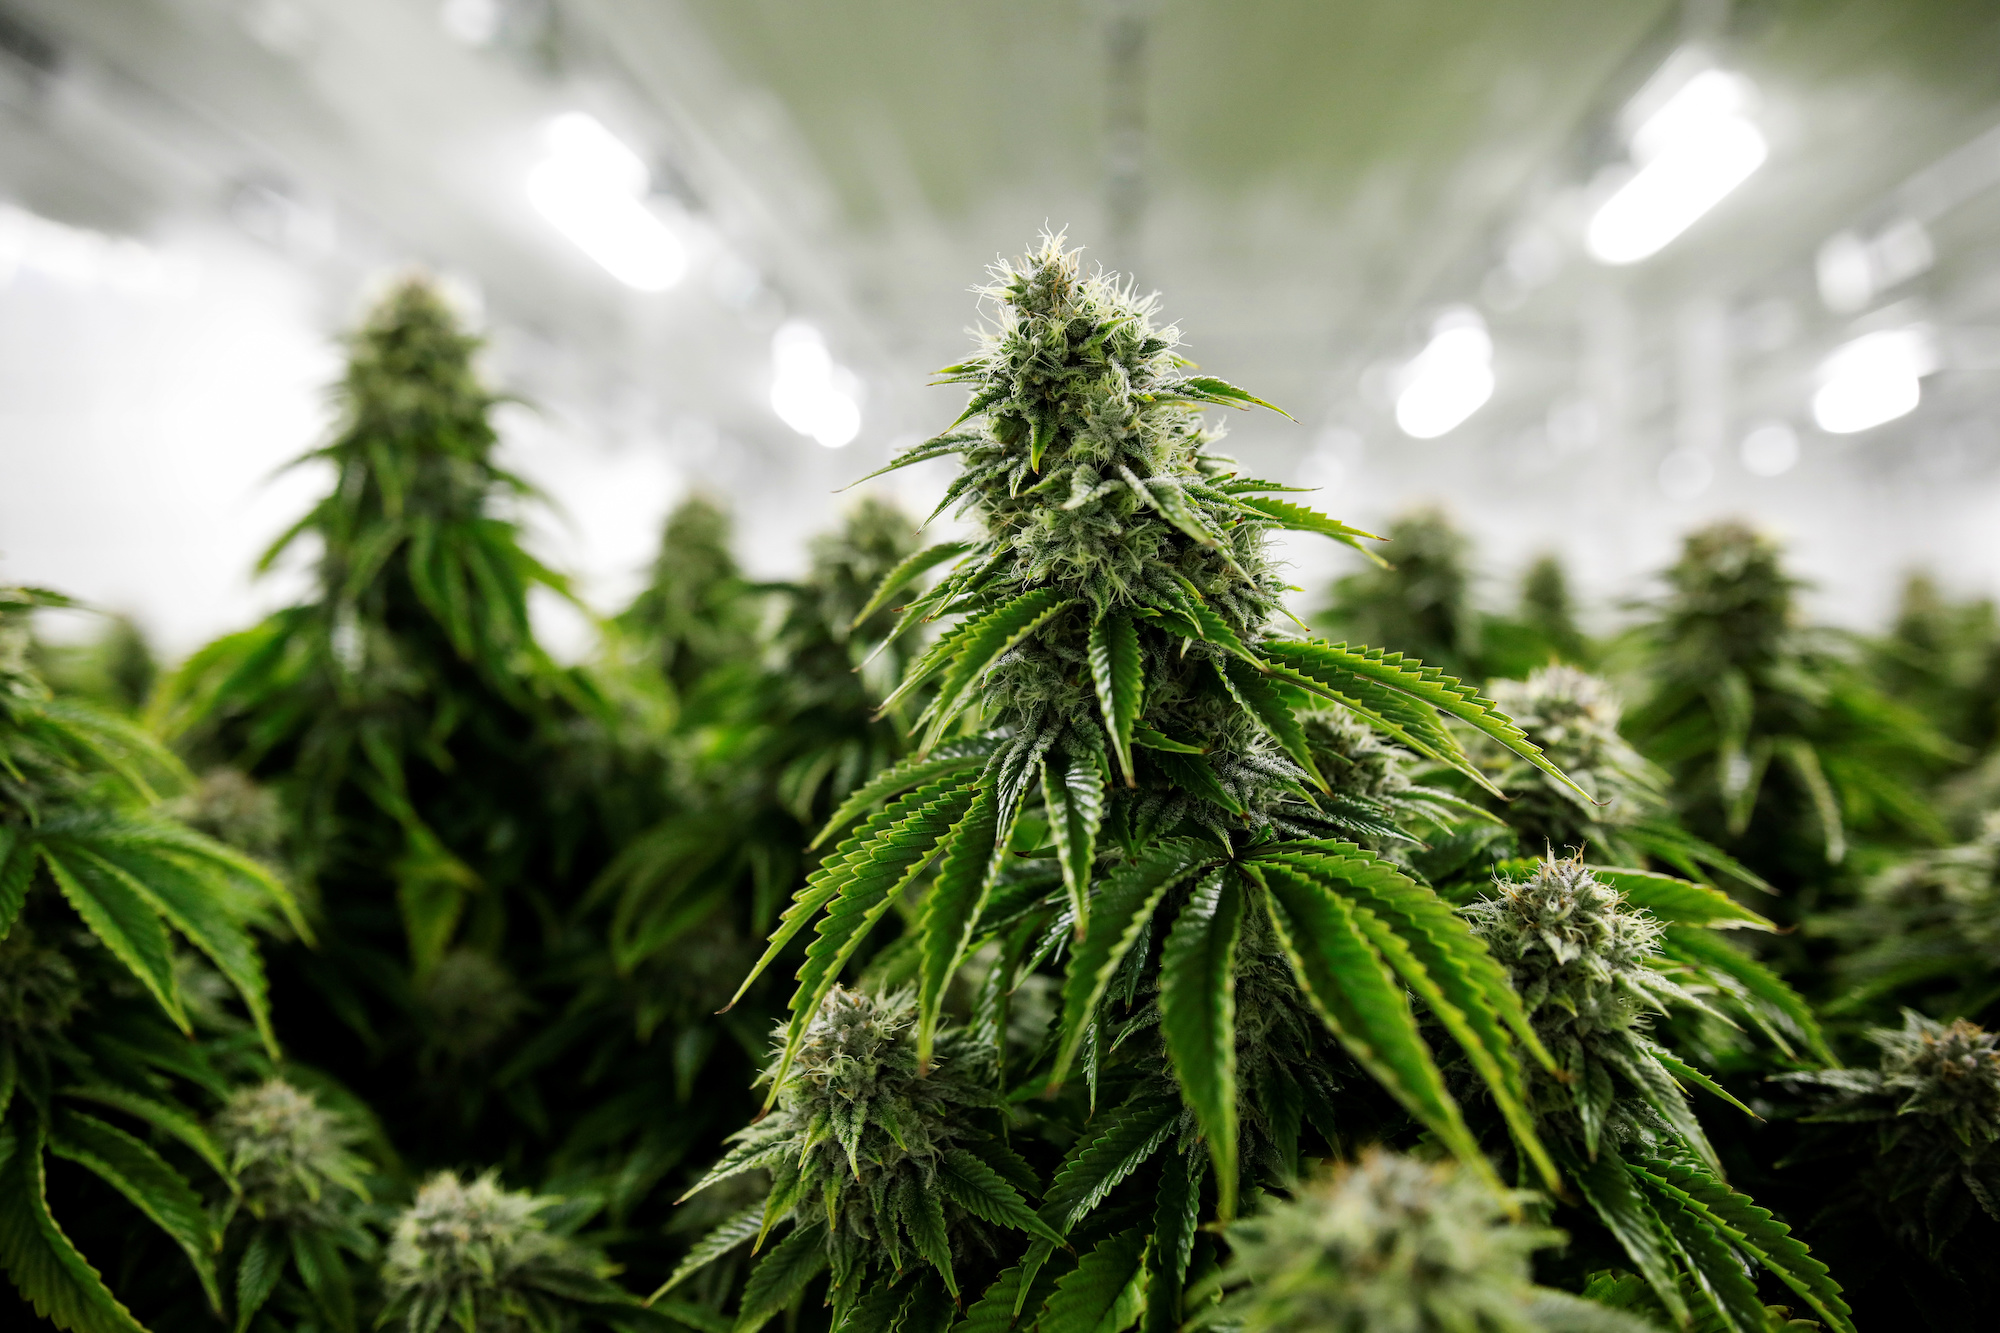 CULTIVATED: Layoffs hit Canndescent, KPMG rakes in millions from cannabis companies, and more.